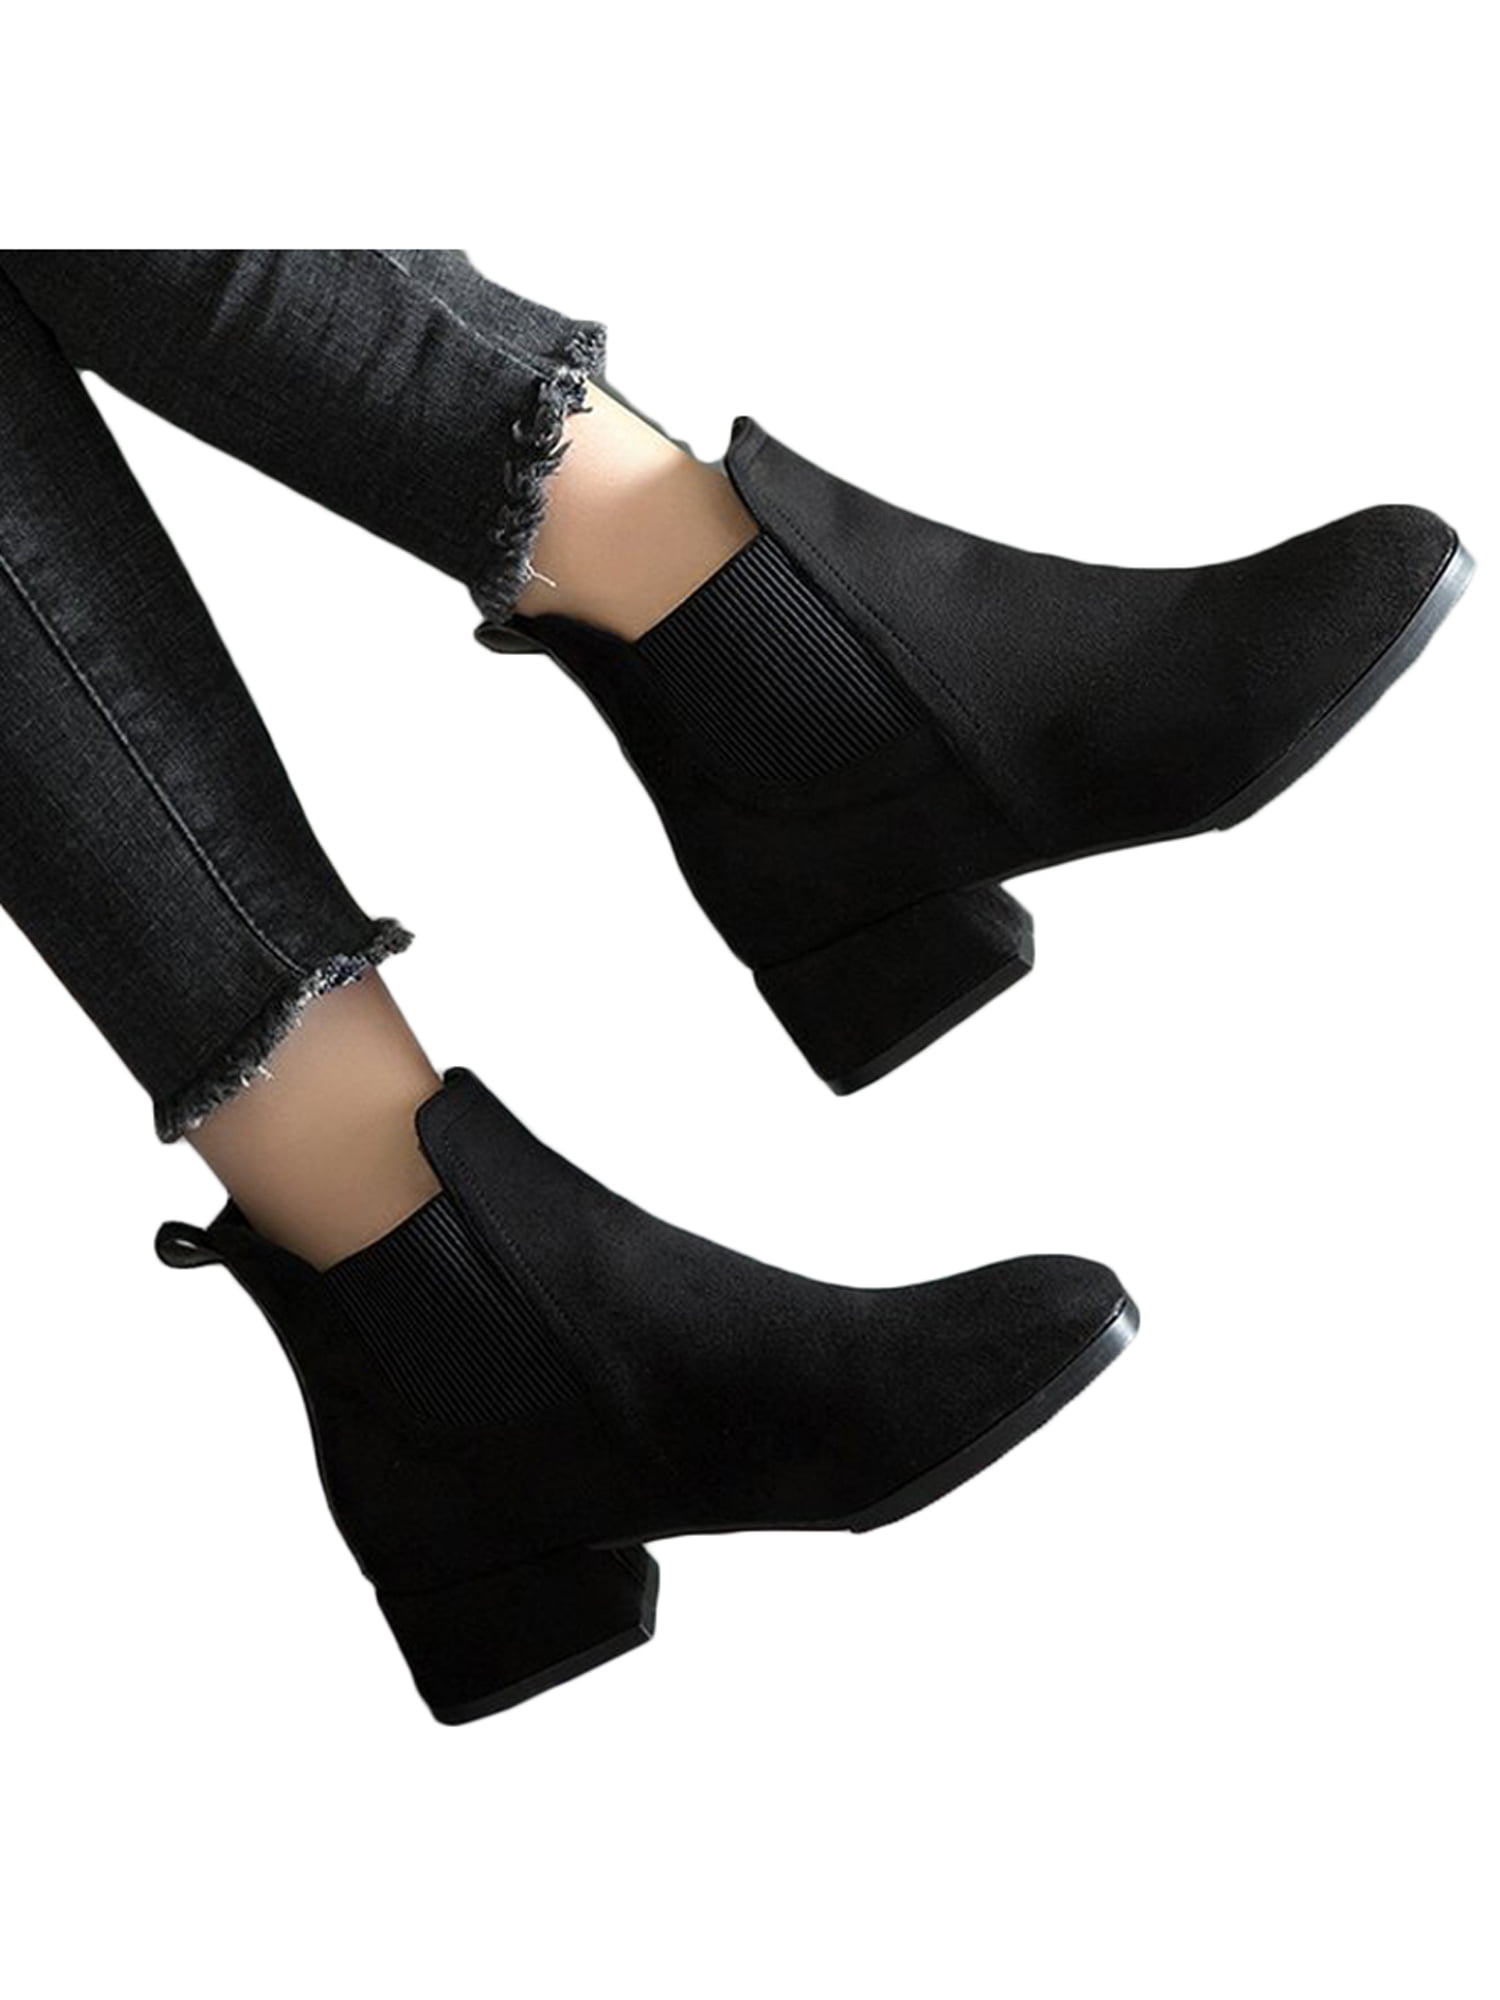 Womens Low Block Heels Flat Ankle Boots Chelsea Casual Booties Shoes Size 6-10.5 